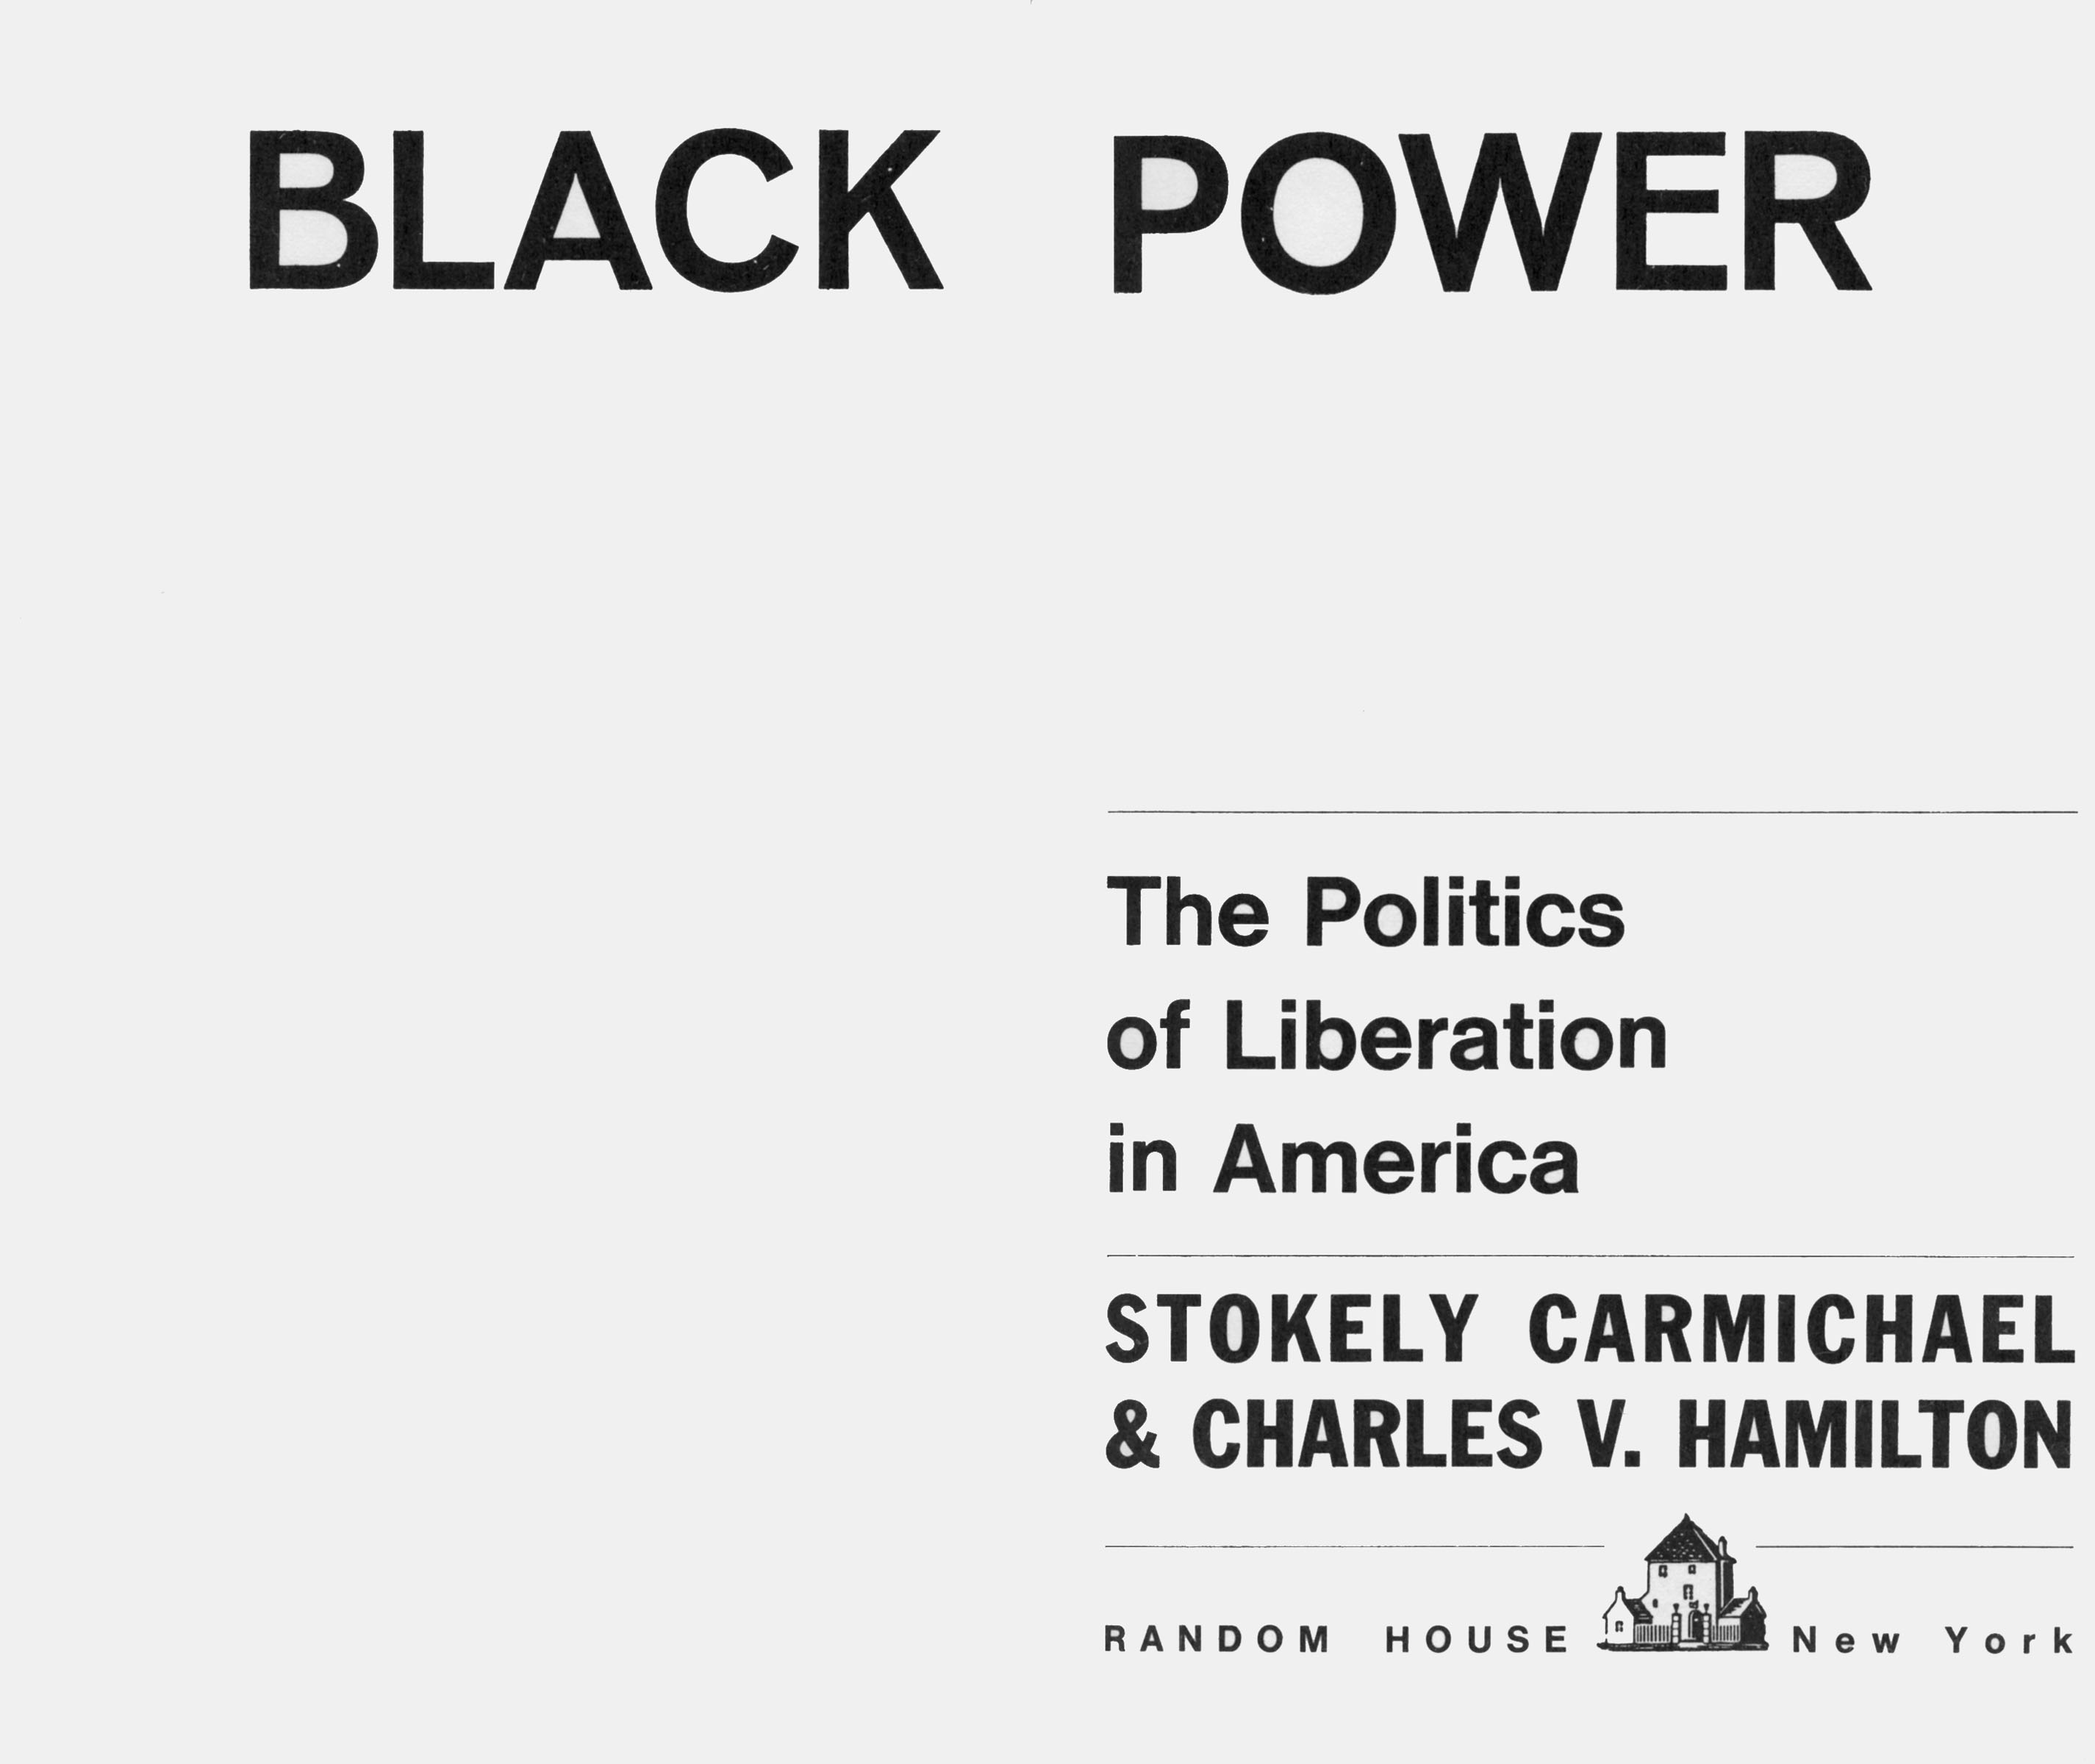 title page of Stokely Carmichael and Charles Hamilton's book Black Power